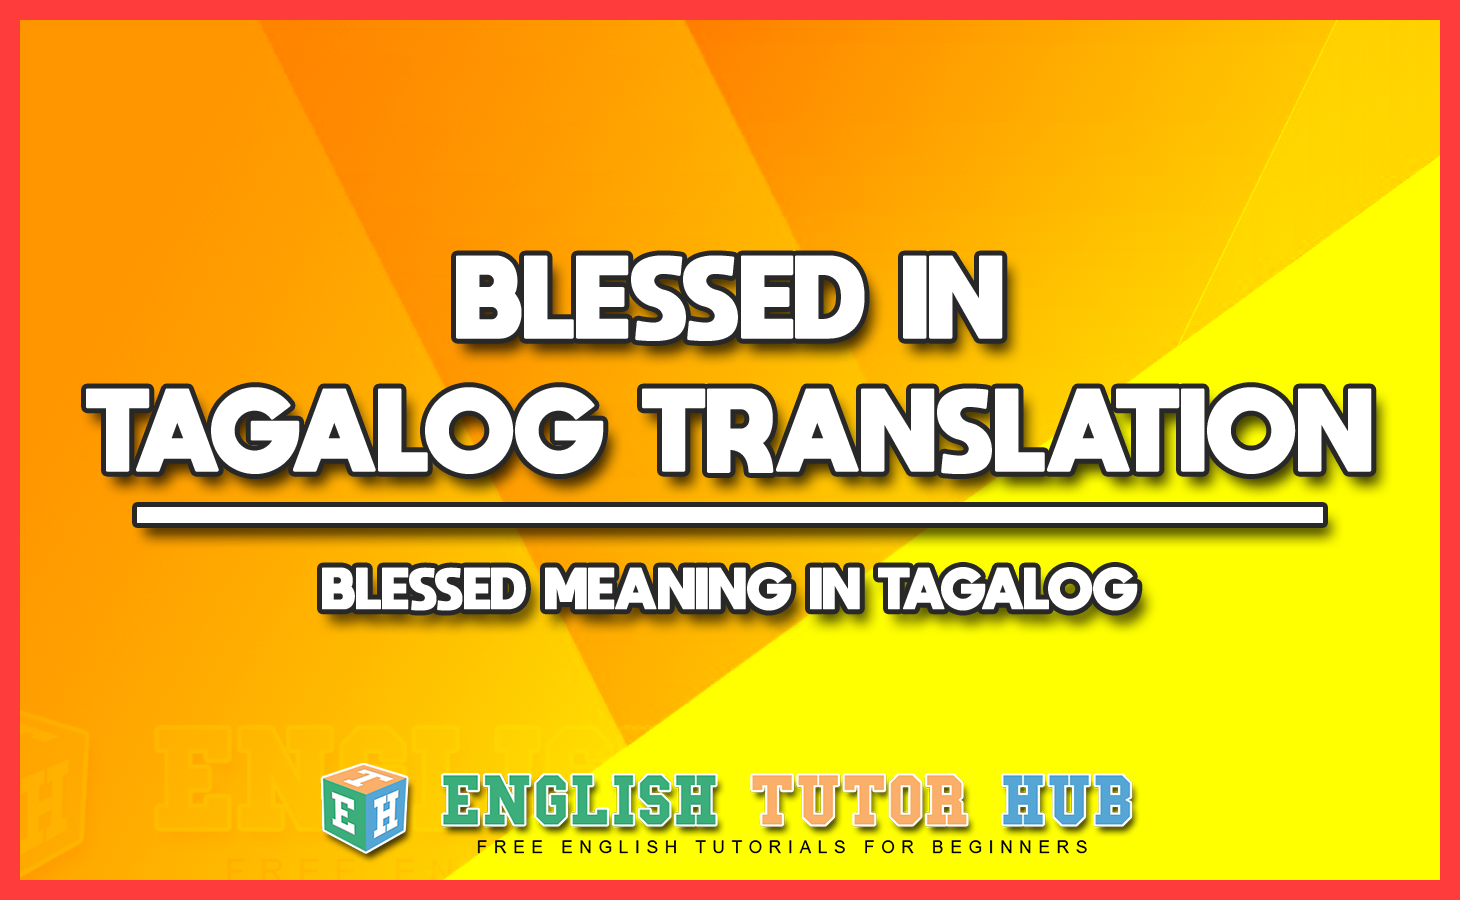 BLESSED IN TAGALOG TRANSLATION - BLESSED MEANING IN TAGALOG